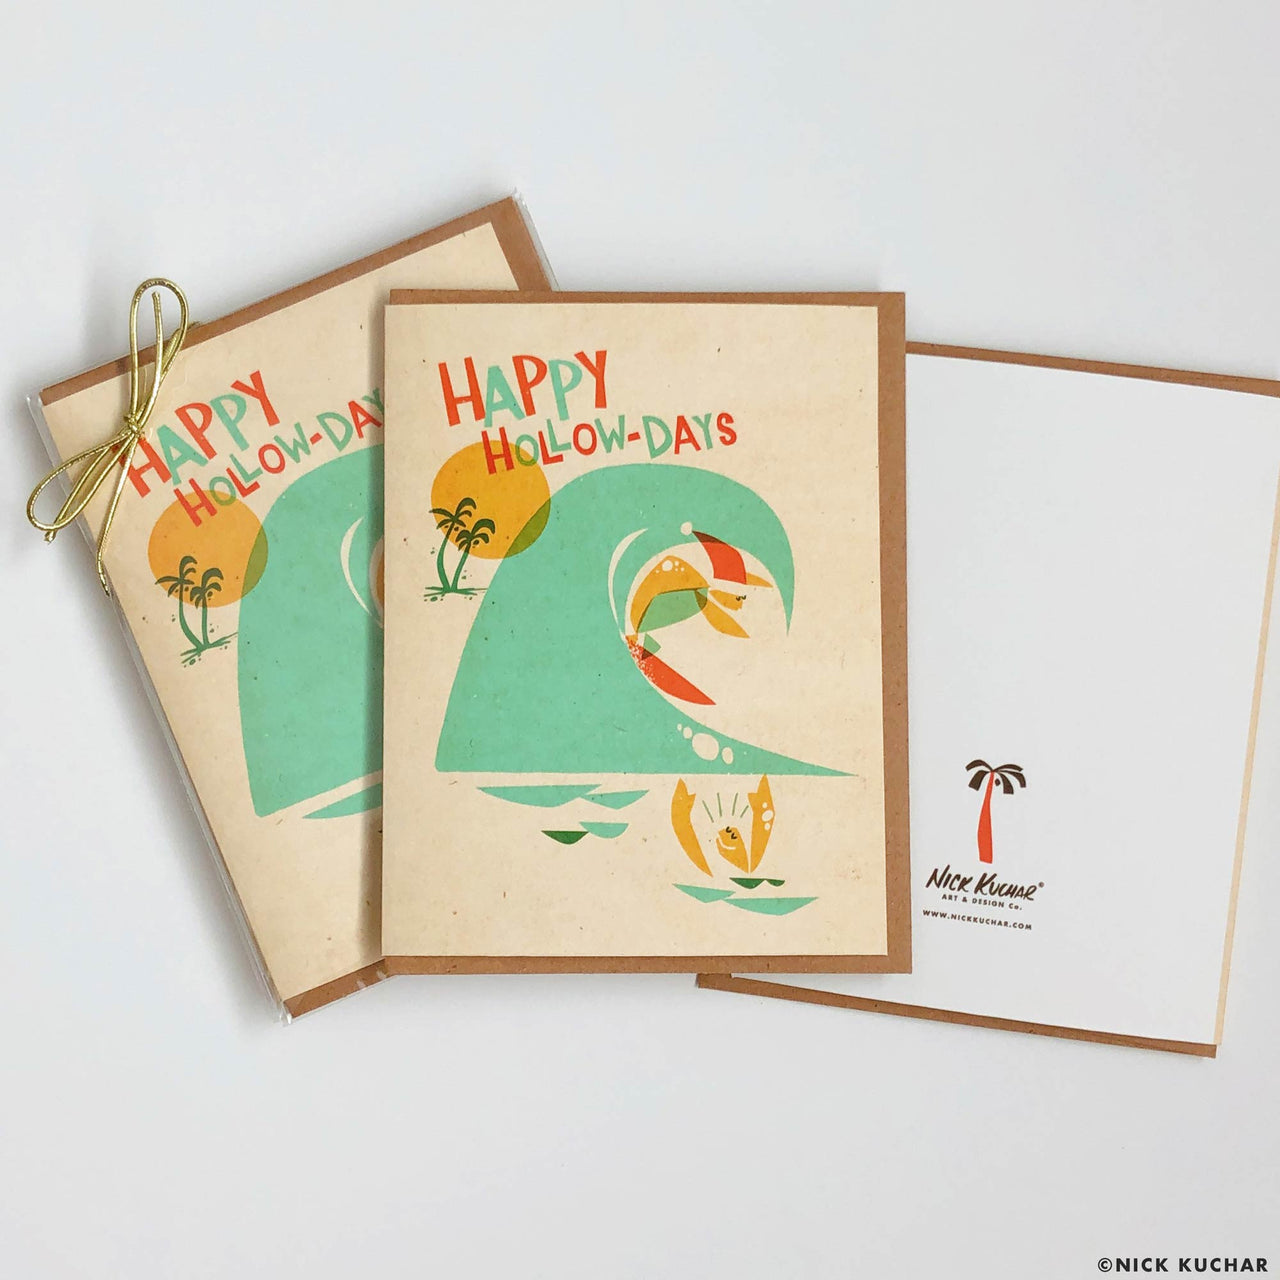 Greeting Card "Happy Hollow-Days" - Set of 5